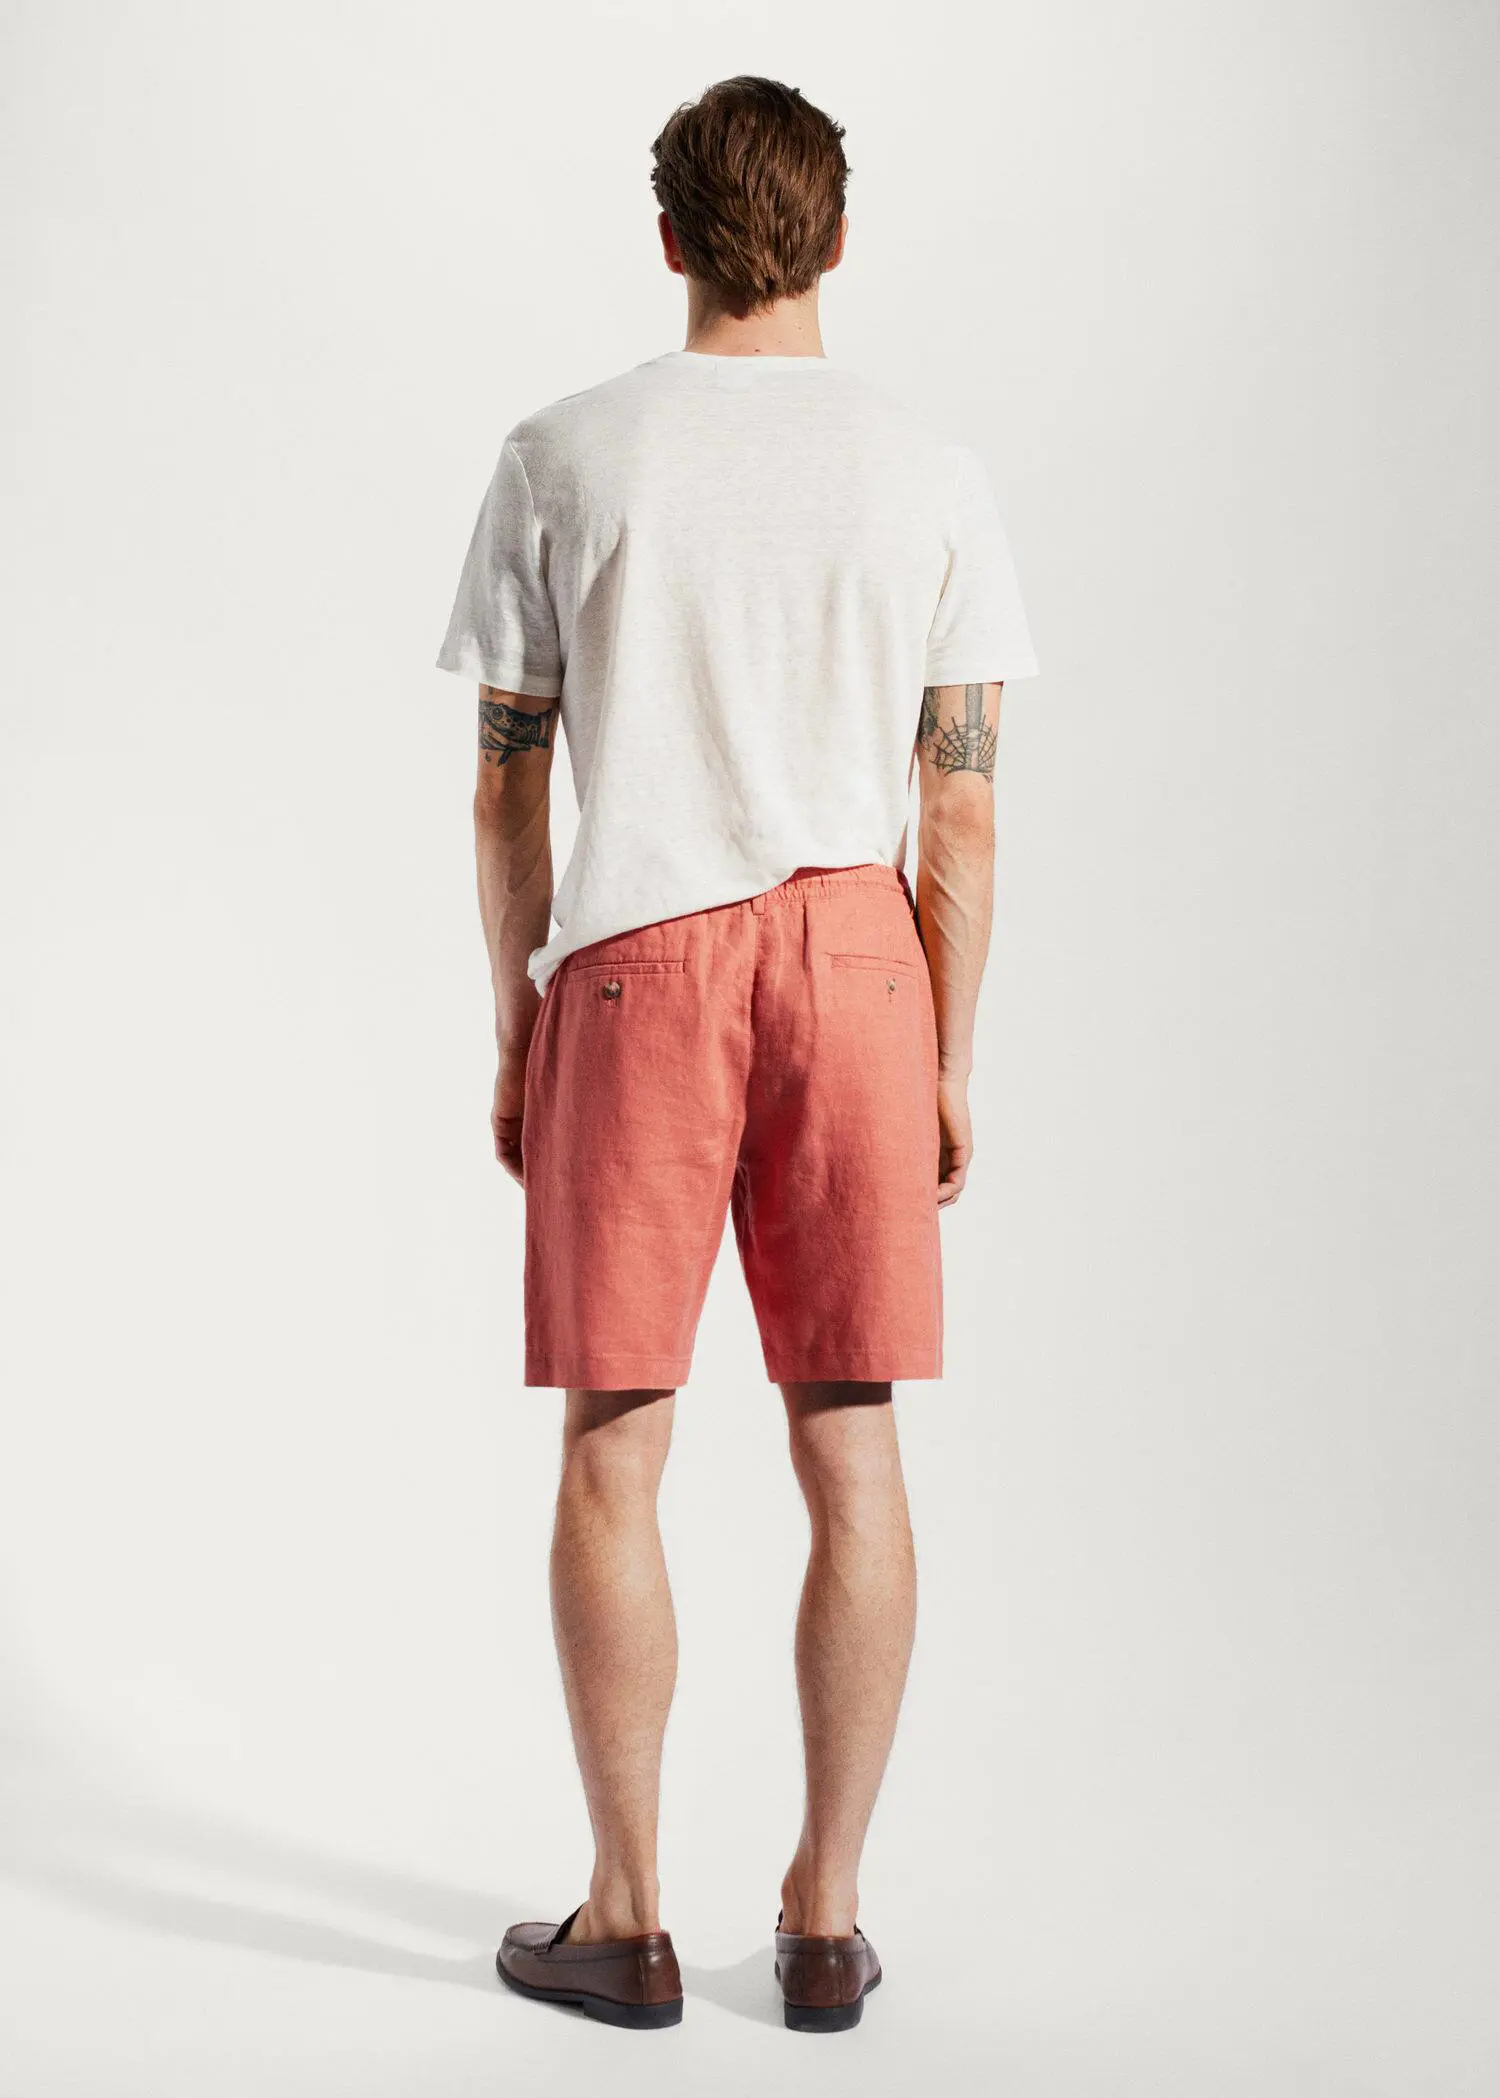 Mango 100% linen bermuda shorts with drawstring. a man in a white shirt and red shorts. 